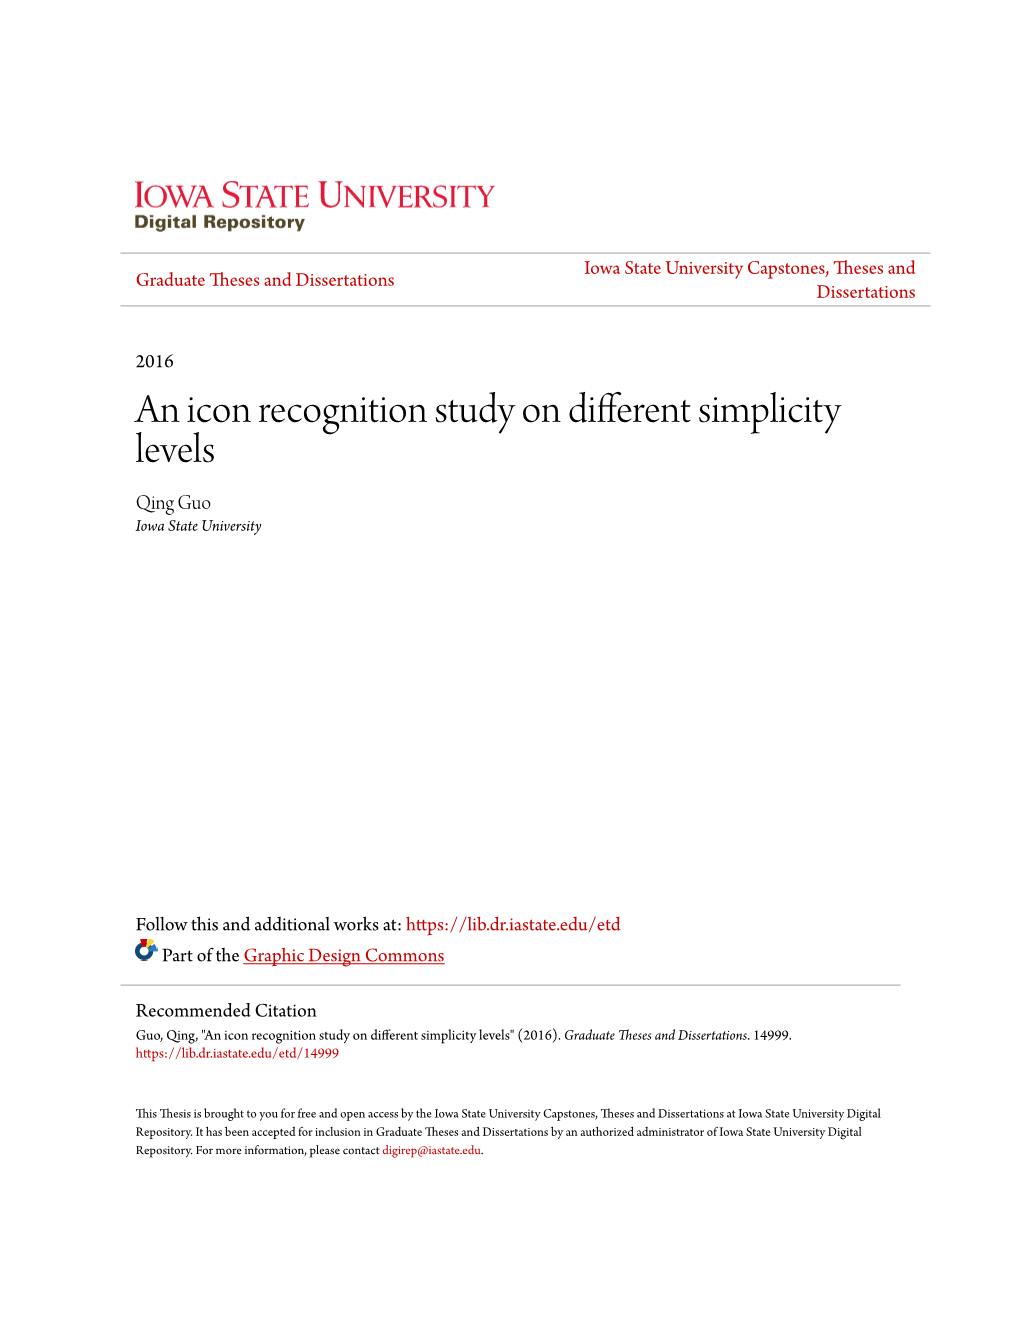 An Icon Recognition Study on Different Simplicity Levels Qing Guo Iowa State University